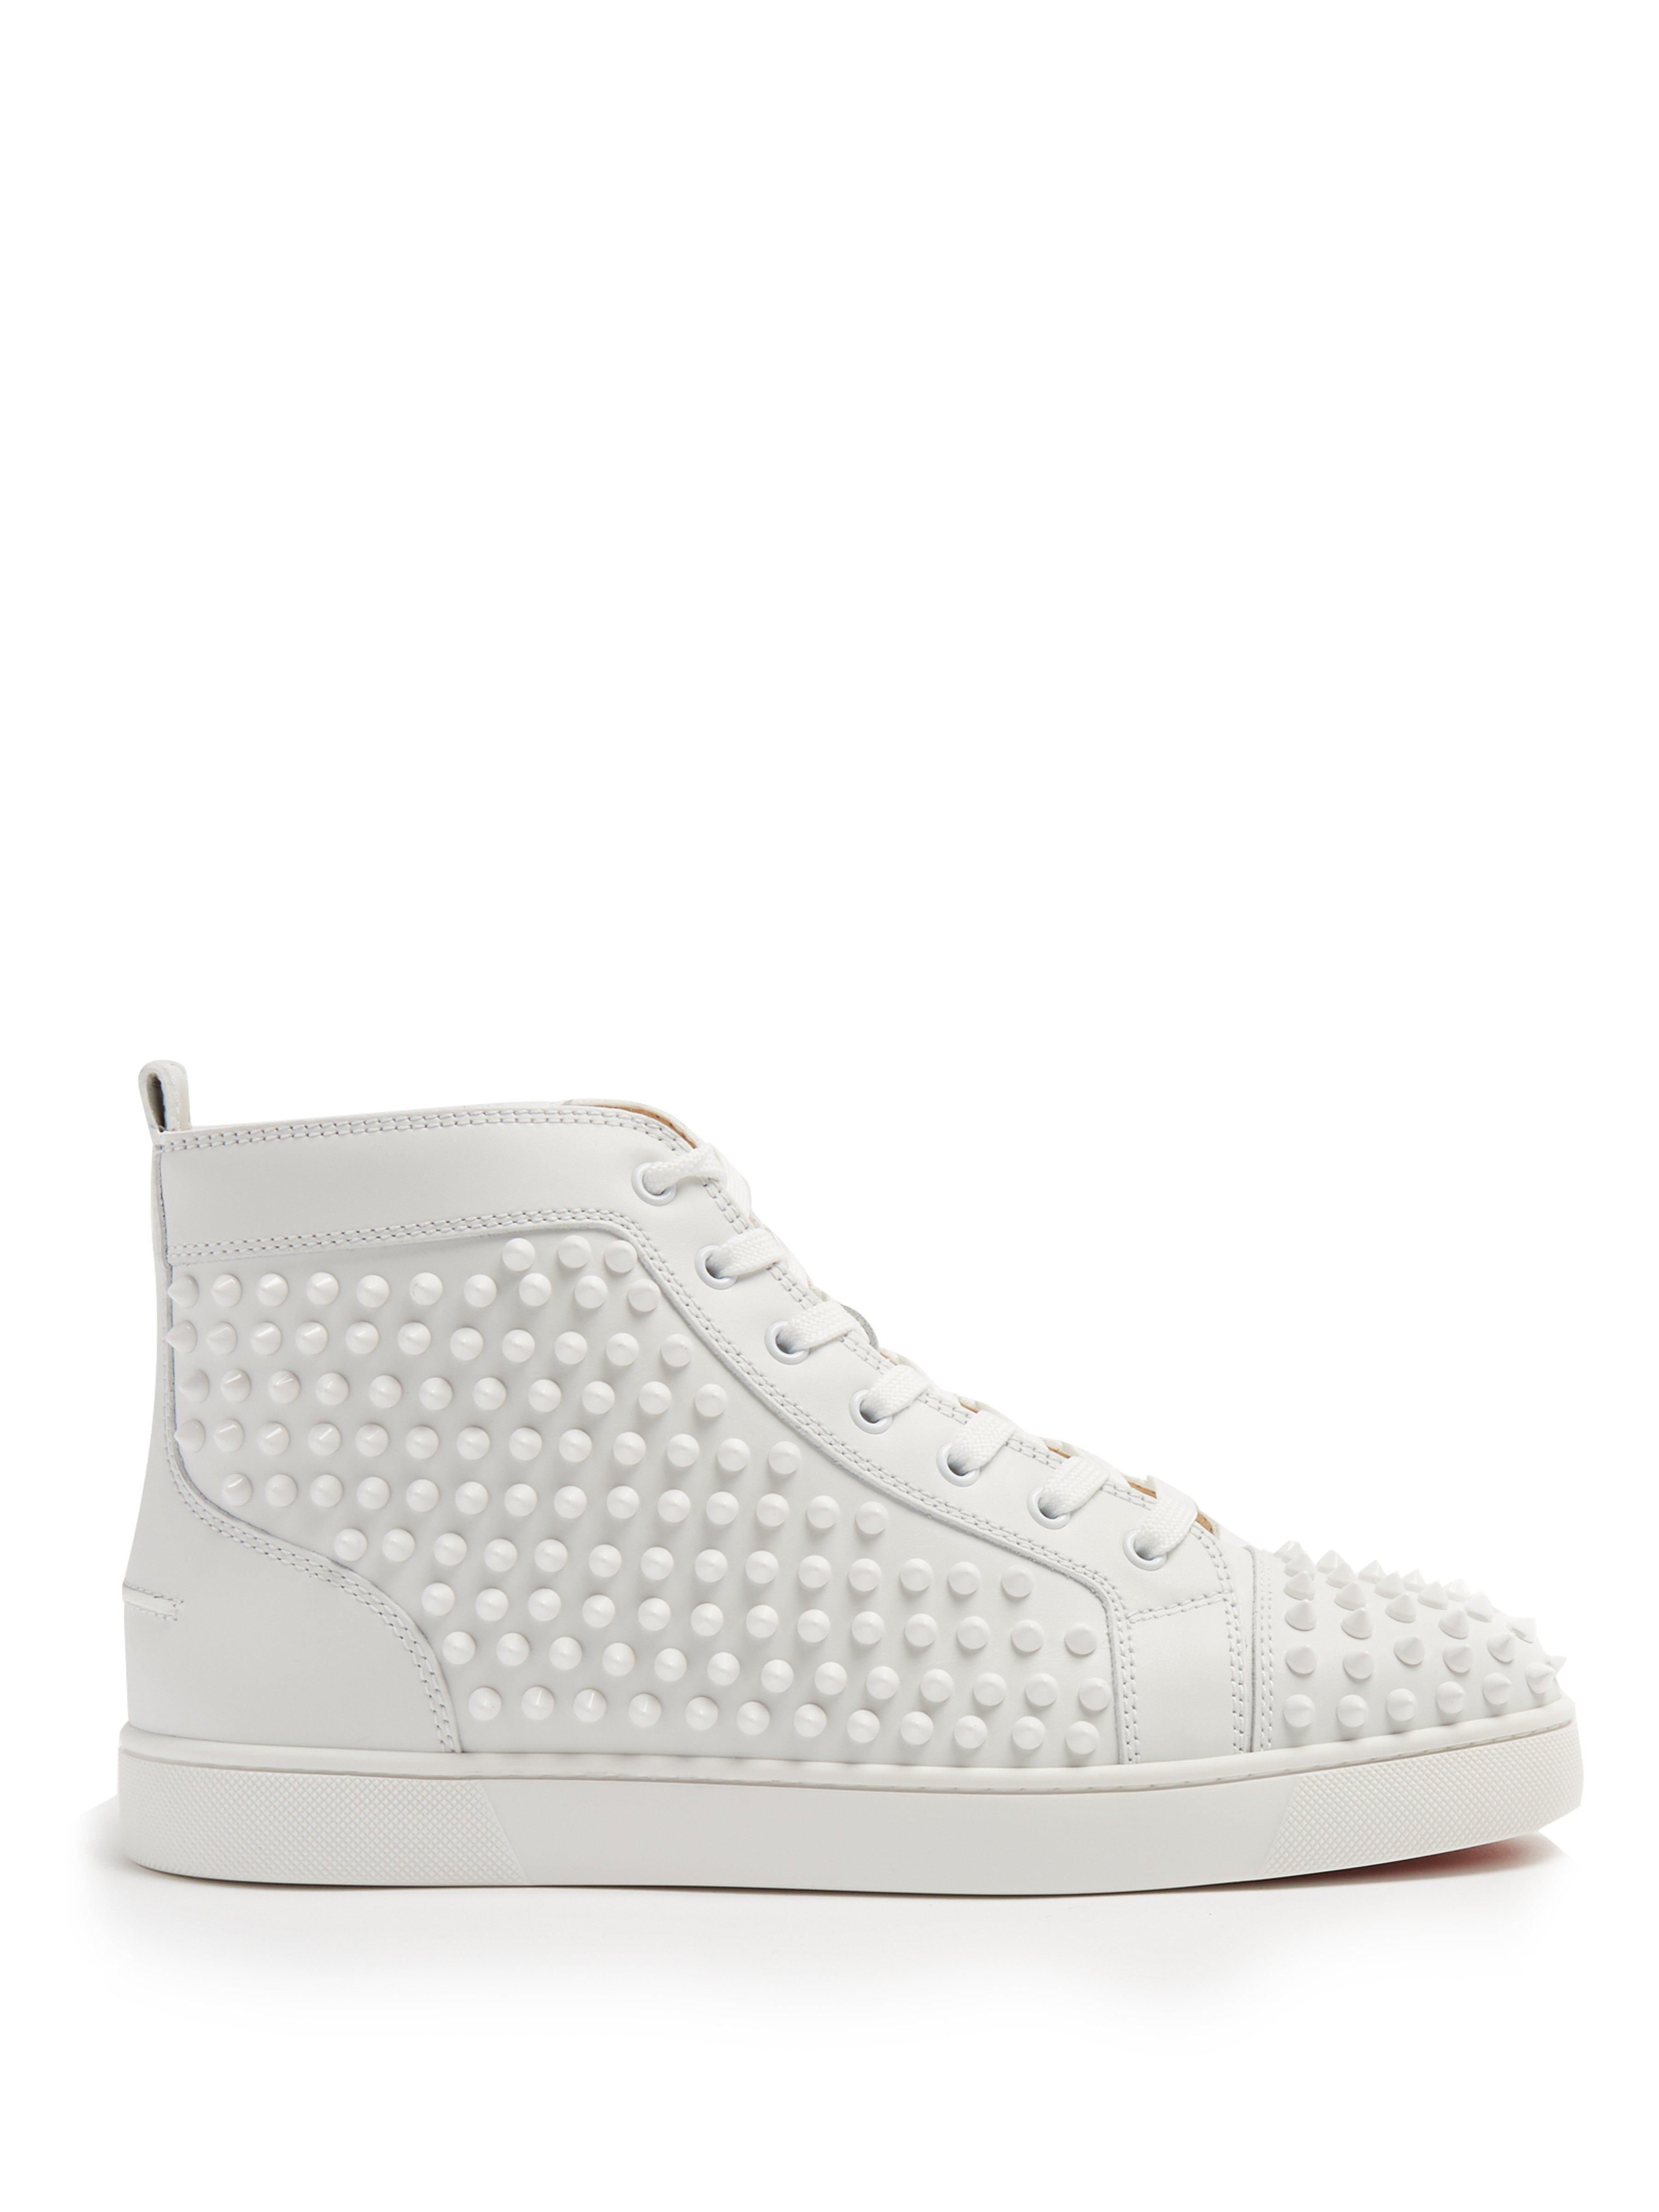 Christian Louboutin Louis Spiked Leather Sneakrs in White for Men | Lyst UK